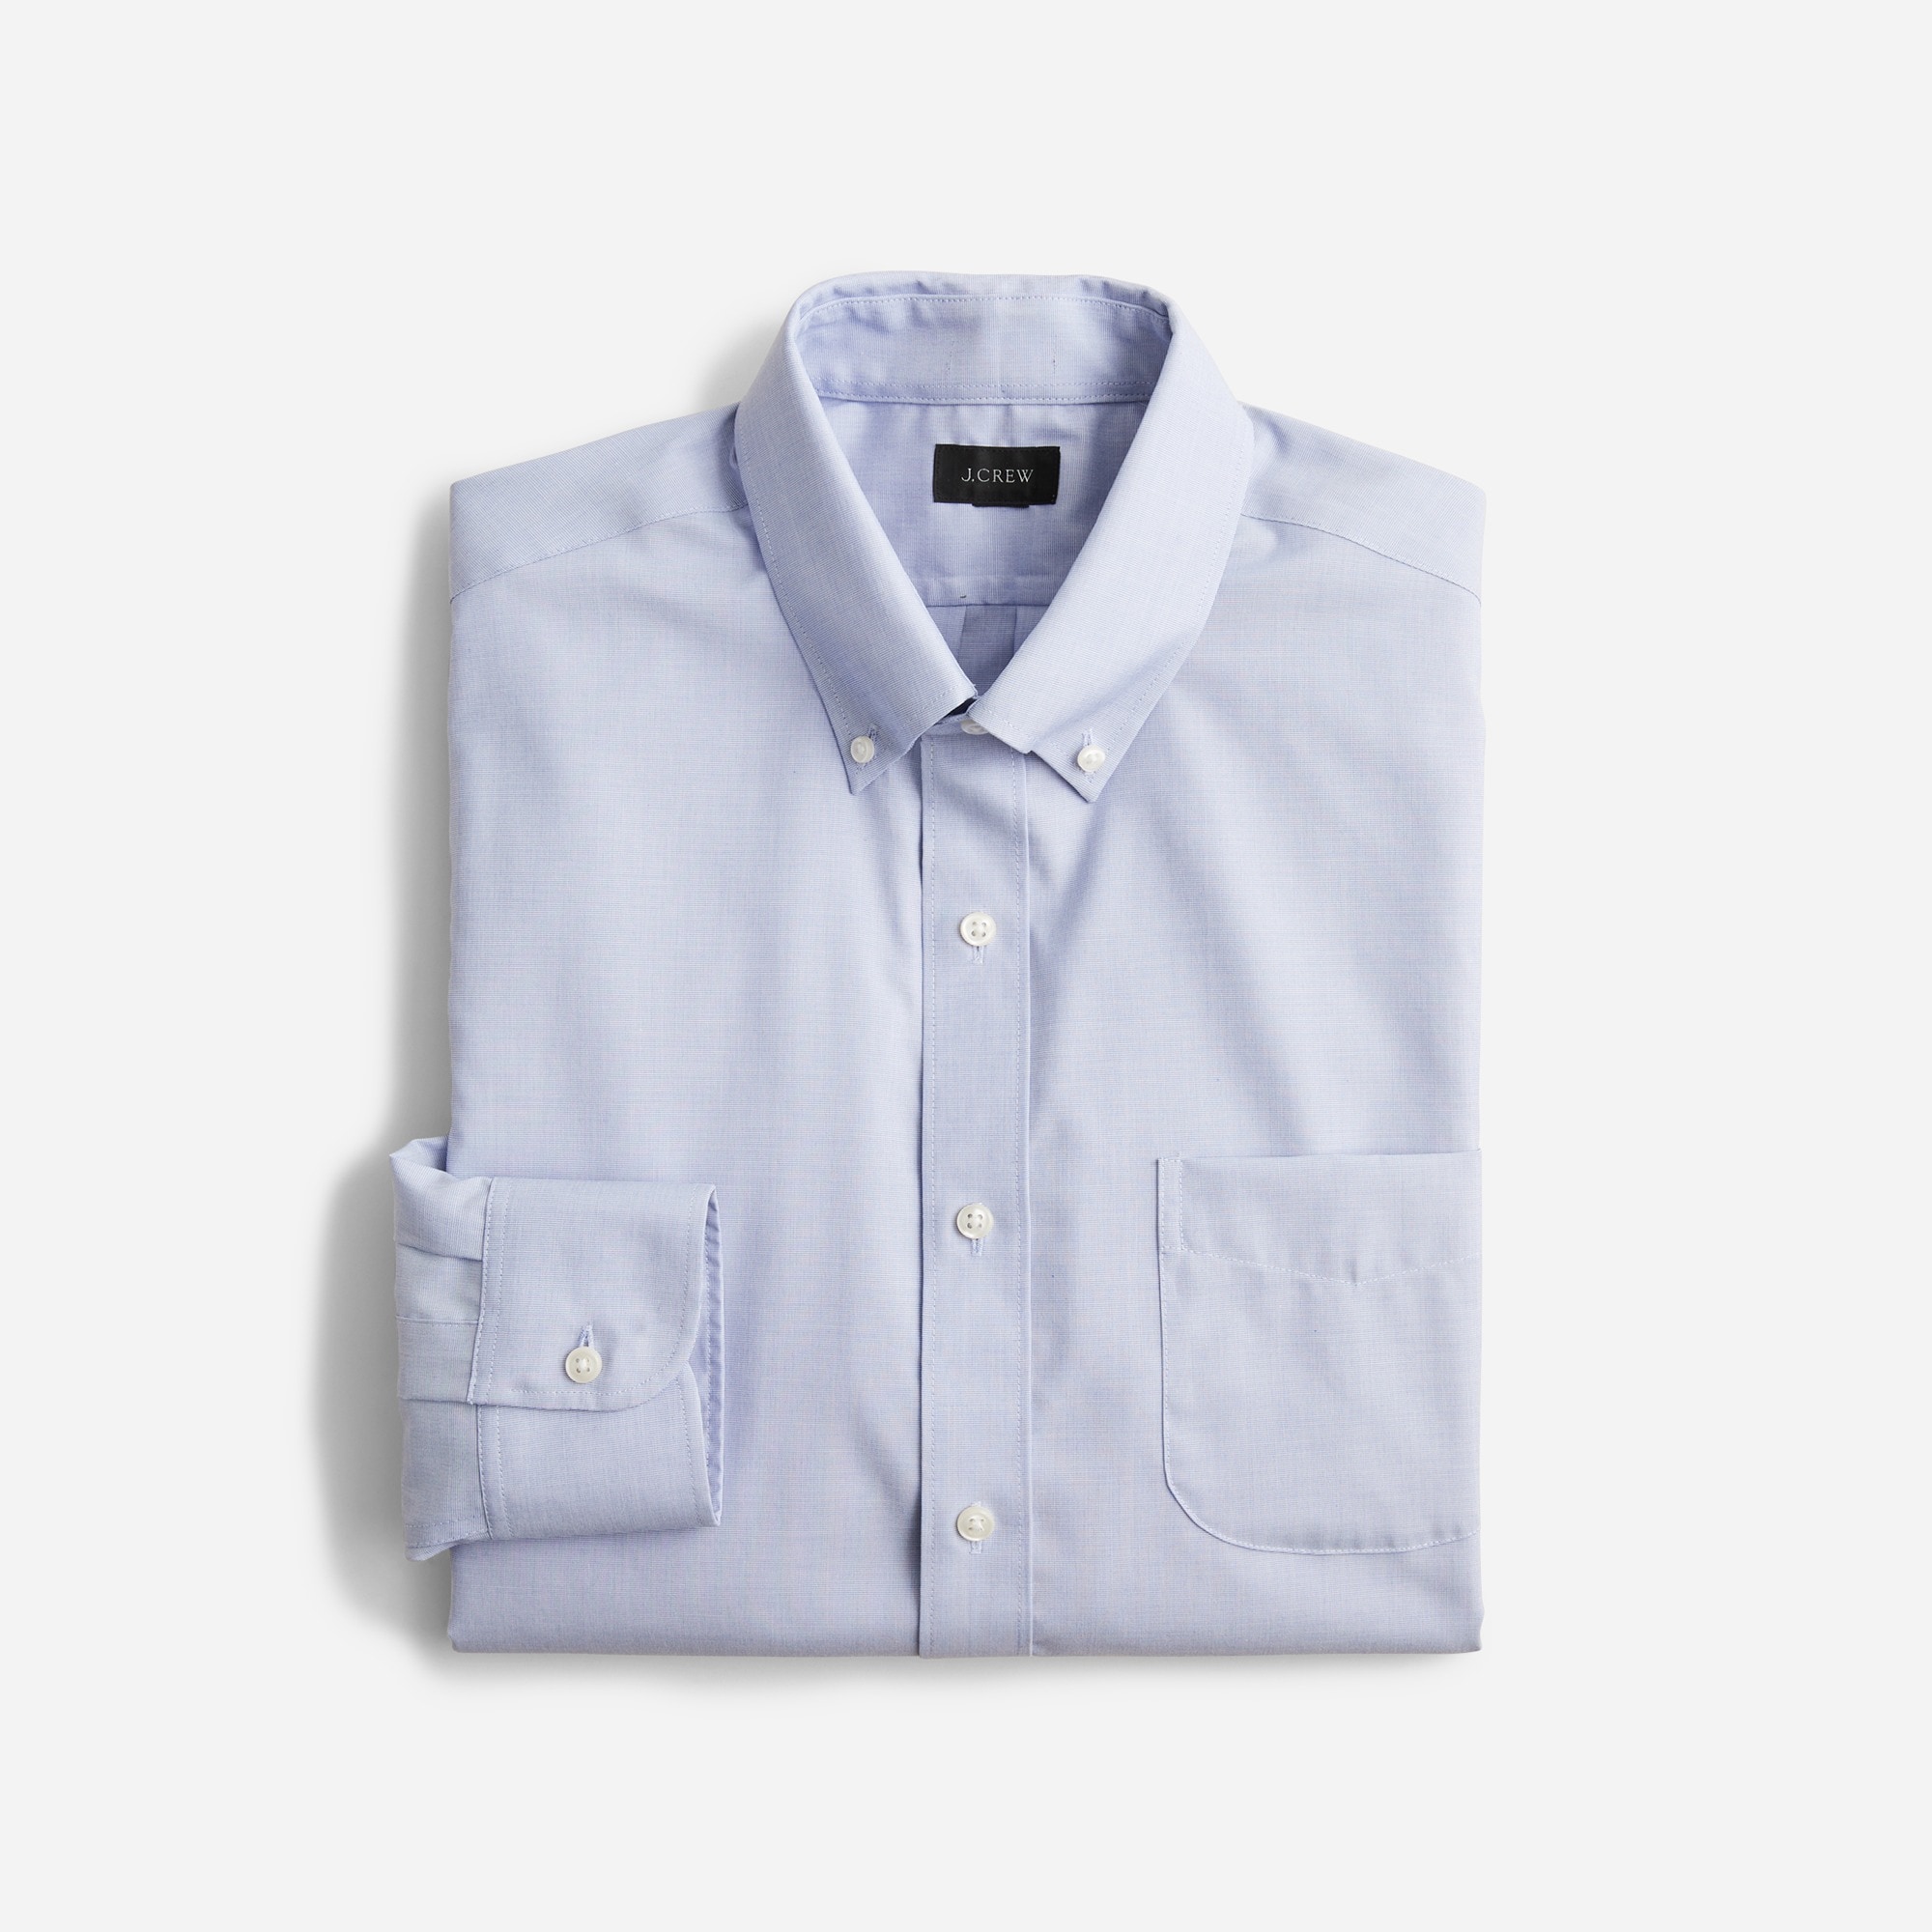 Jcrew Bowery wrinkle-free dress shirt with button-down collar